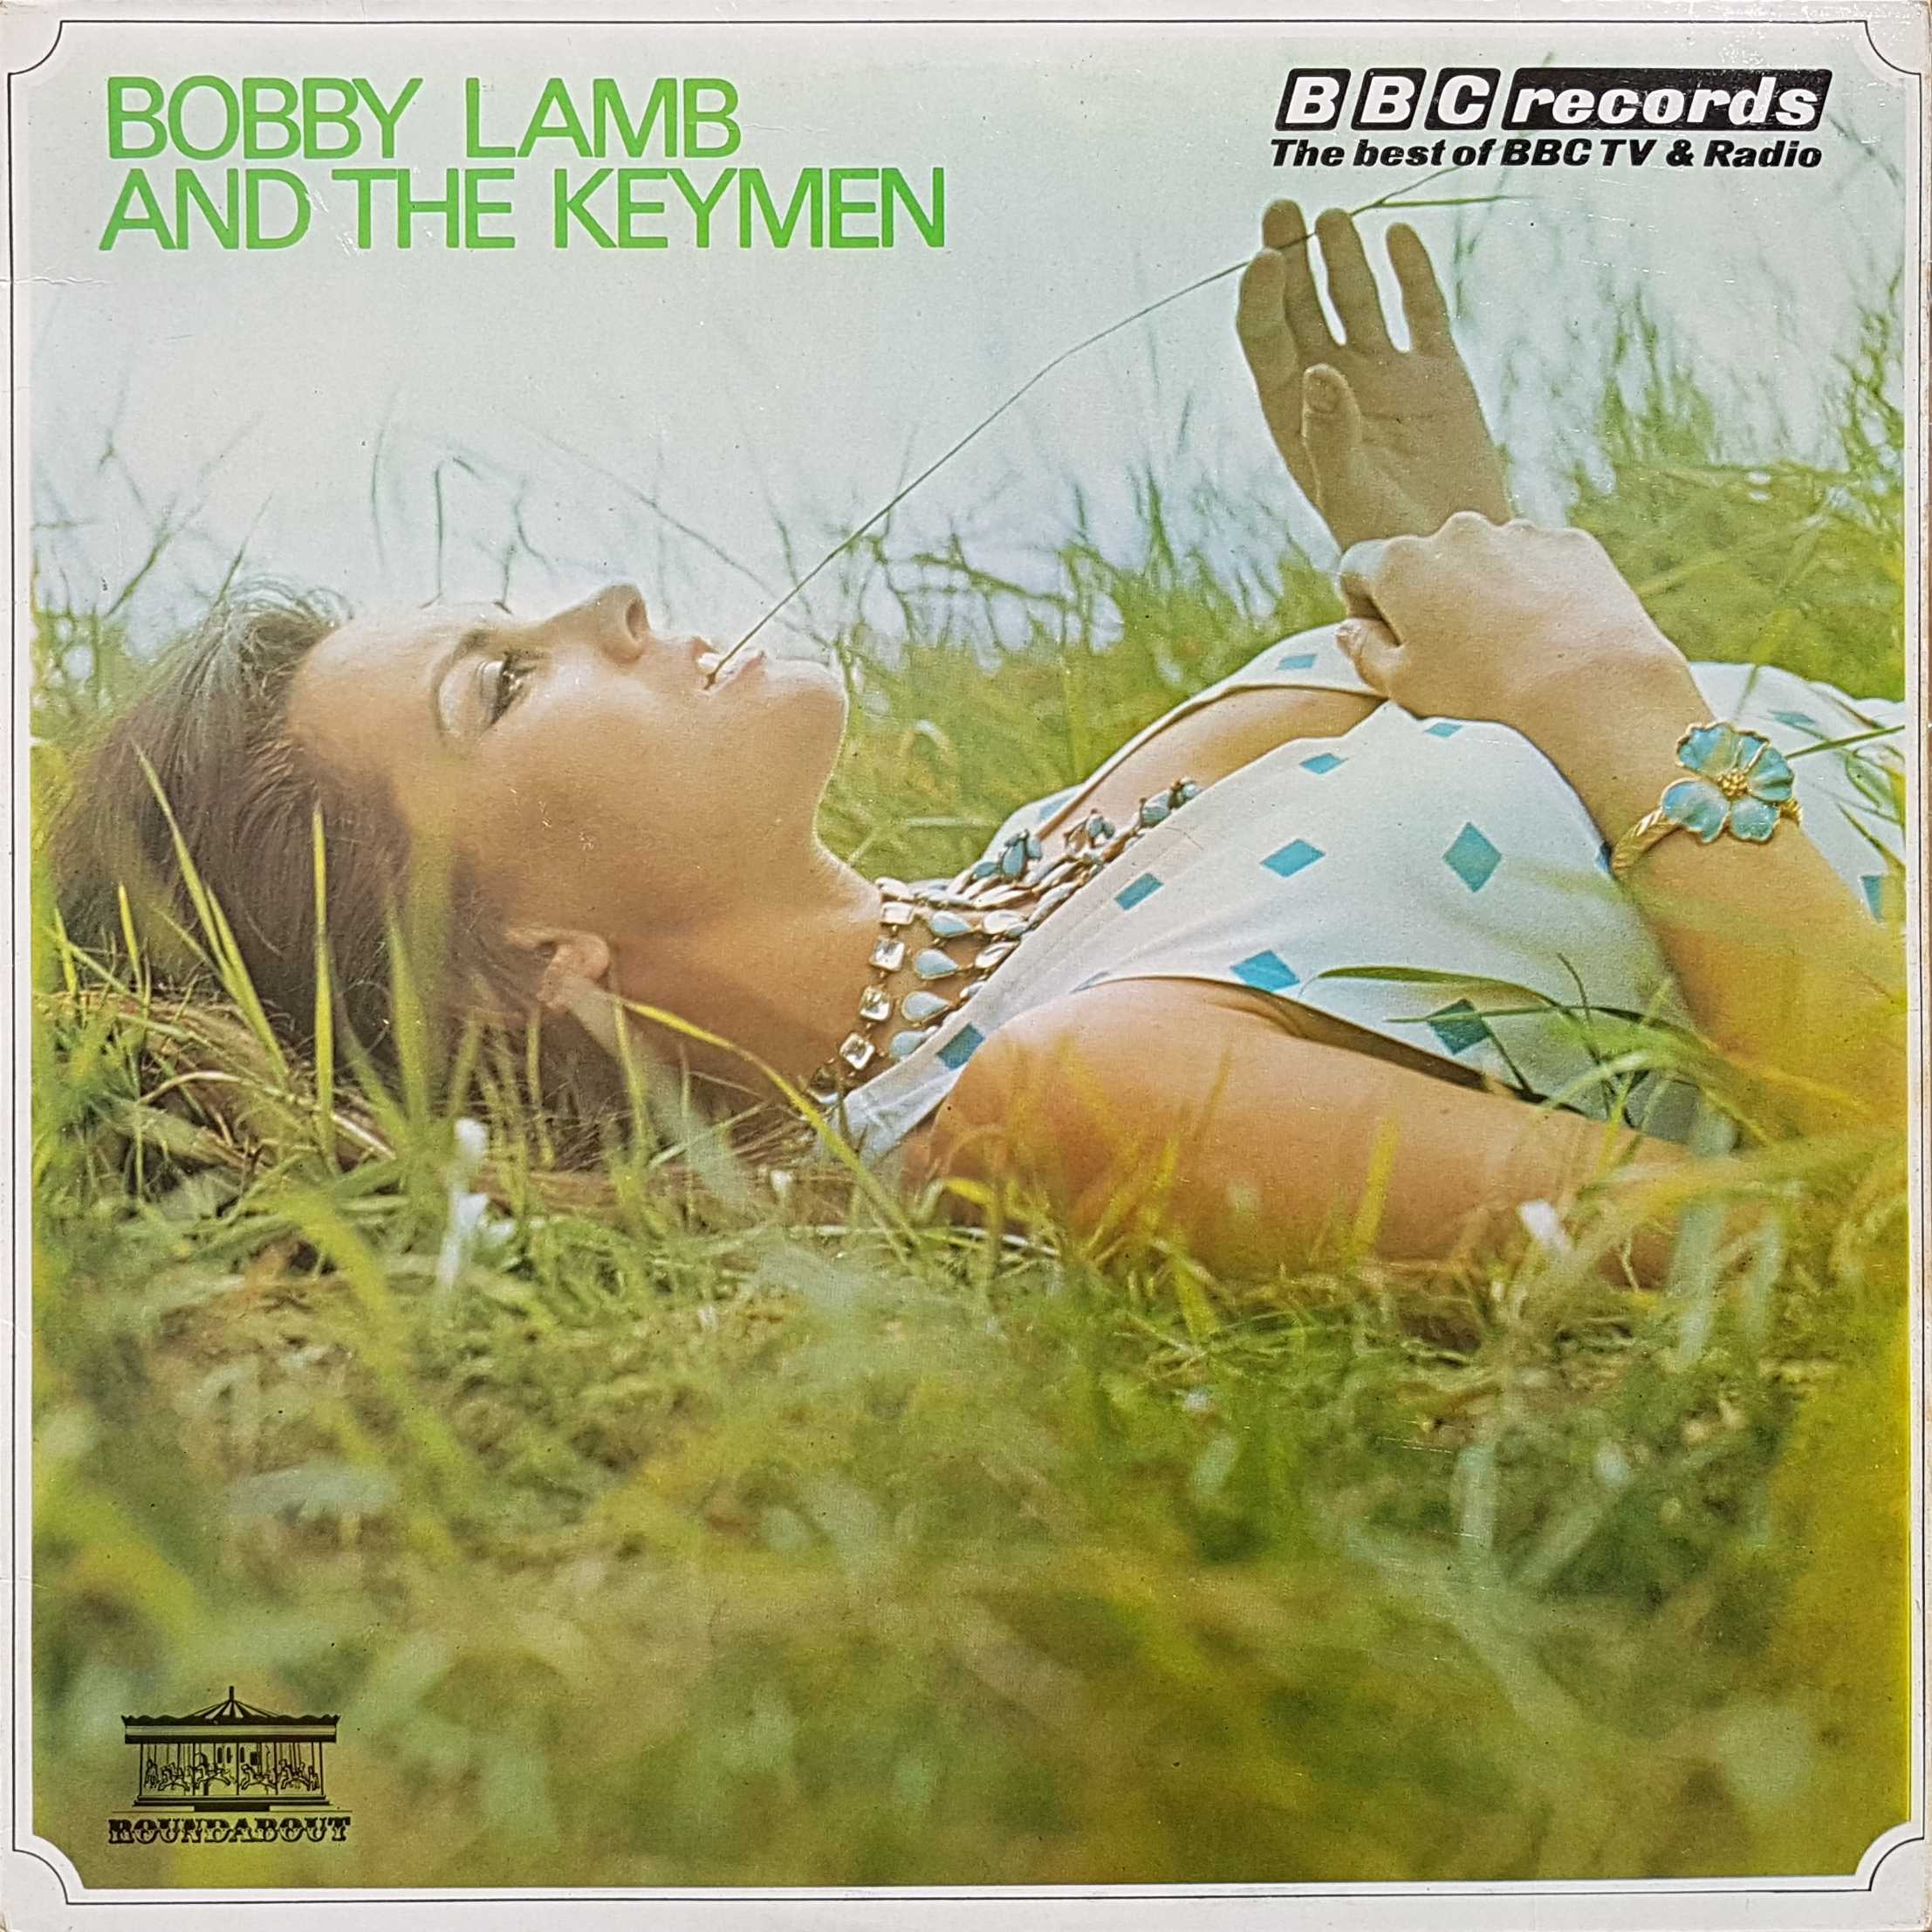 Picture of RBT 101 Bobby, Lamb & Keymen by artist Various from the BBC albums - Records and Tapes library